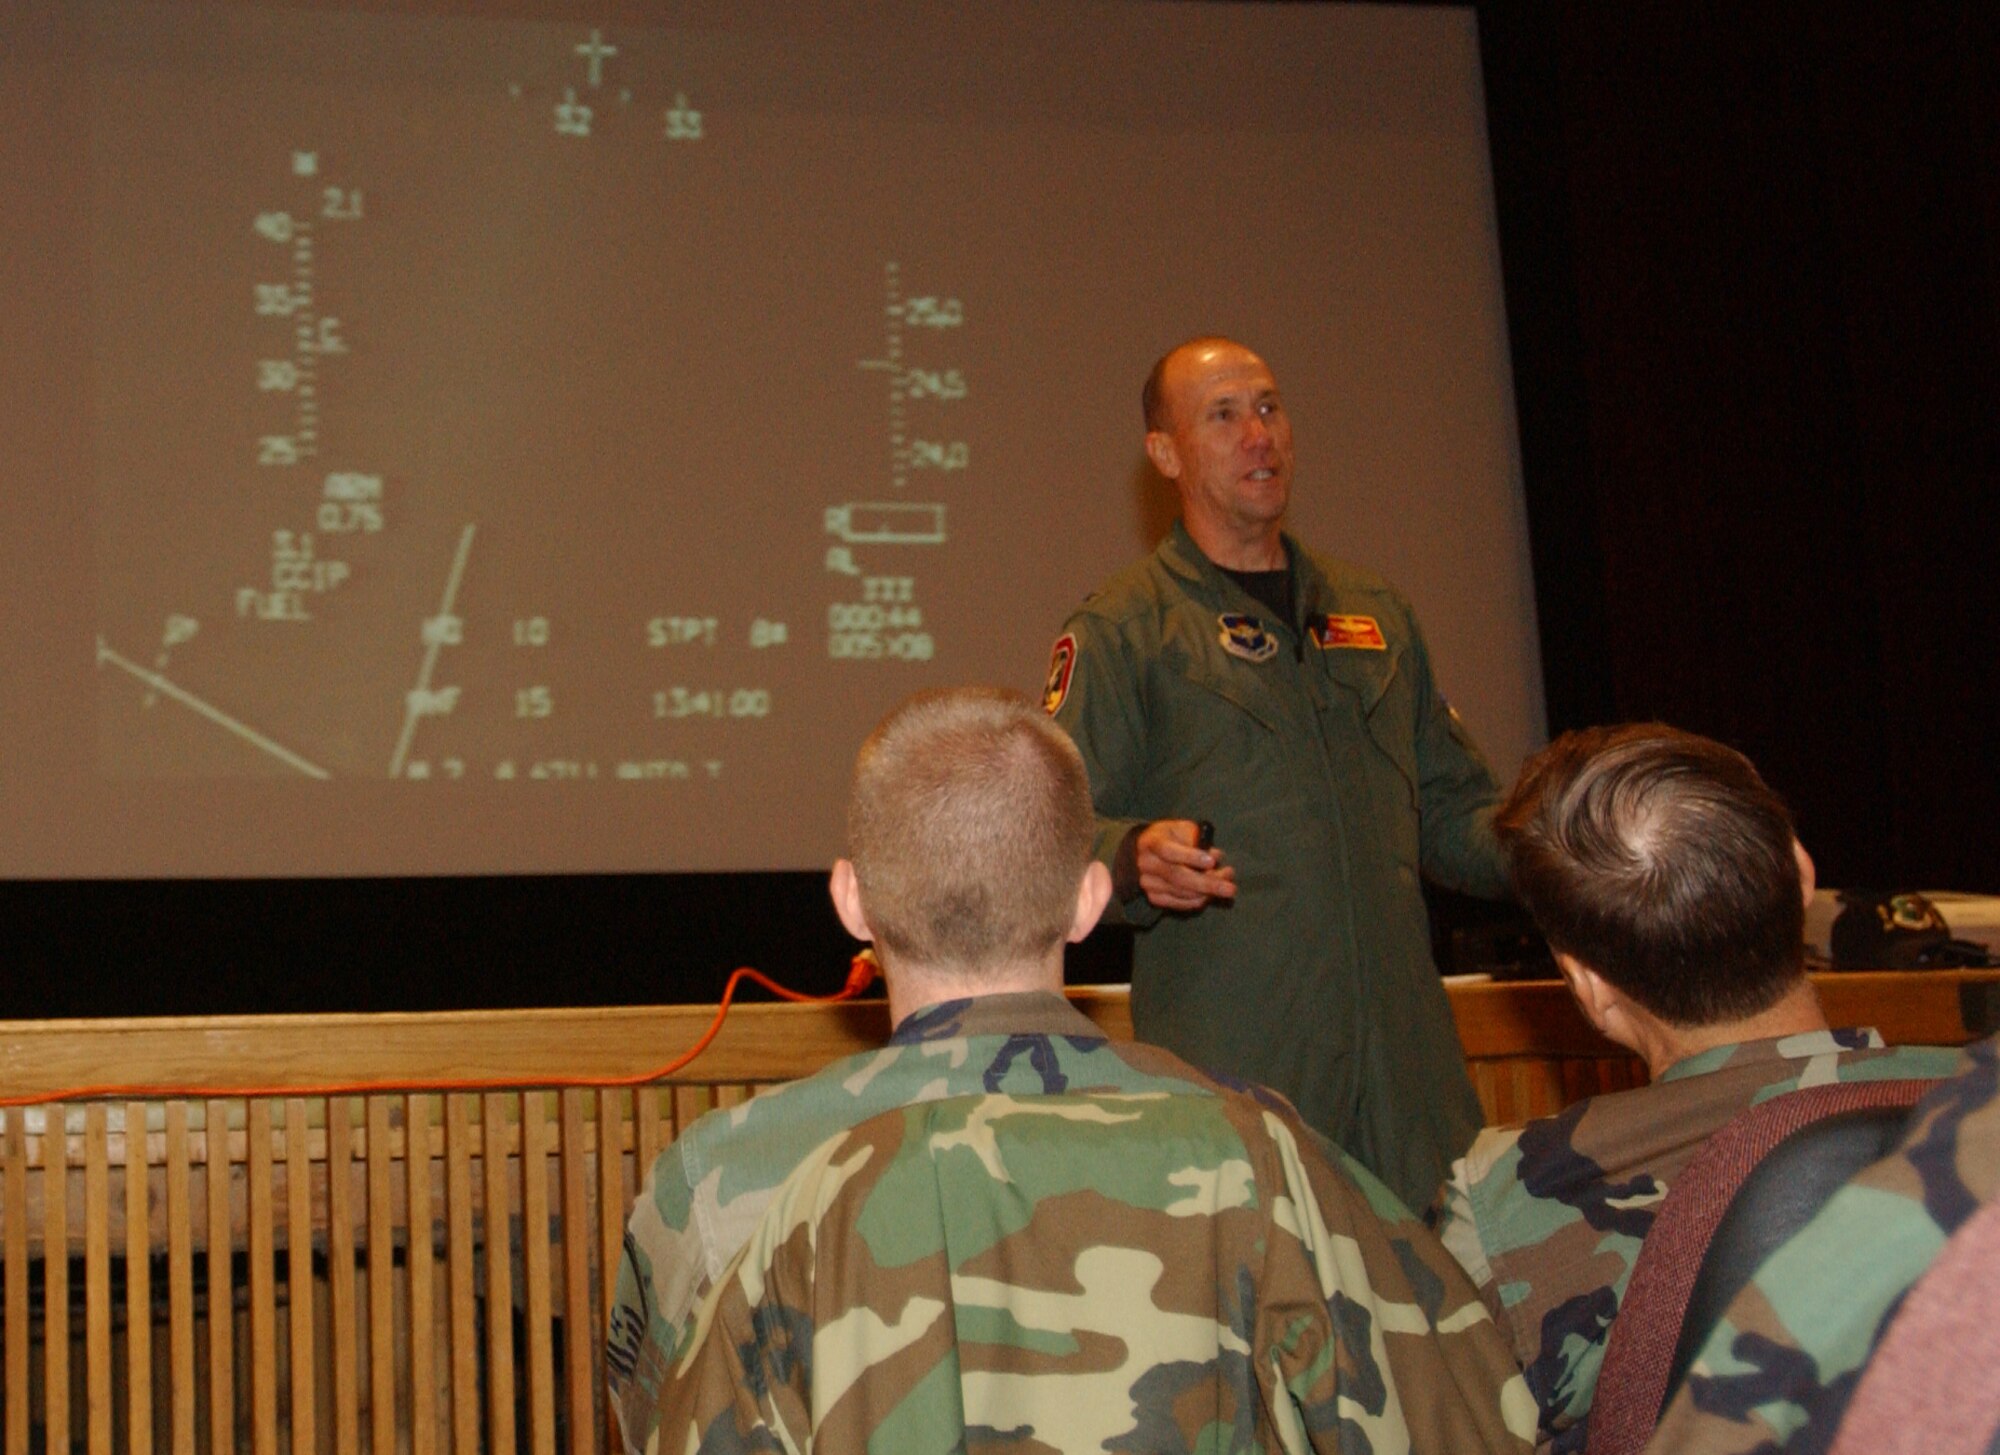 MINOT AIR FORCE BASE, N.D.  -- Col. Mike Roberts, 178th Fighter Wing vice commander, from Springfield Air National Guard Base, Ohio, talks to Airmen at the base theater about his experiences as a former POW. Colonel Roberts used his cockpit’s heads up display video from the evening of January 19, 1991 to describe how his F-16 was shot down during a bombing raid over Baghdad, Iraq during Operation Desert Storm. The colonel was the guest of honor during the base’s POW/MIA Recognition Day Sept. 22. (U.S. Air Force photo by Staff Sgt. Joe Laws)